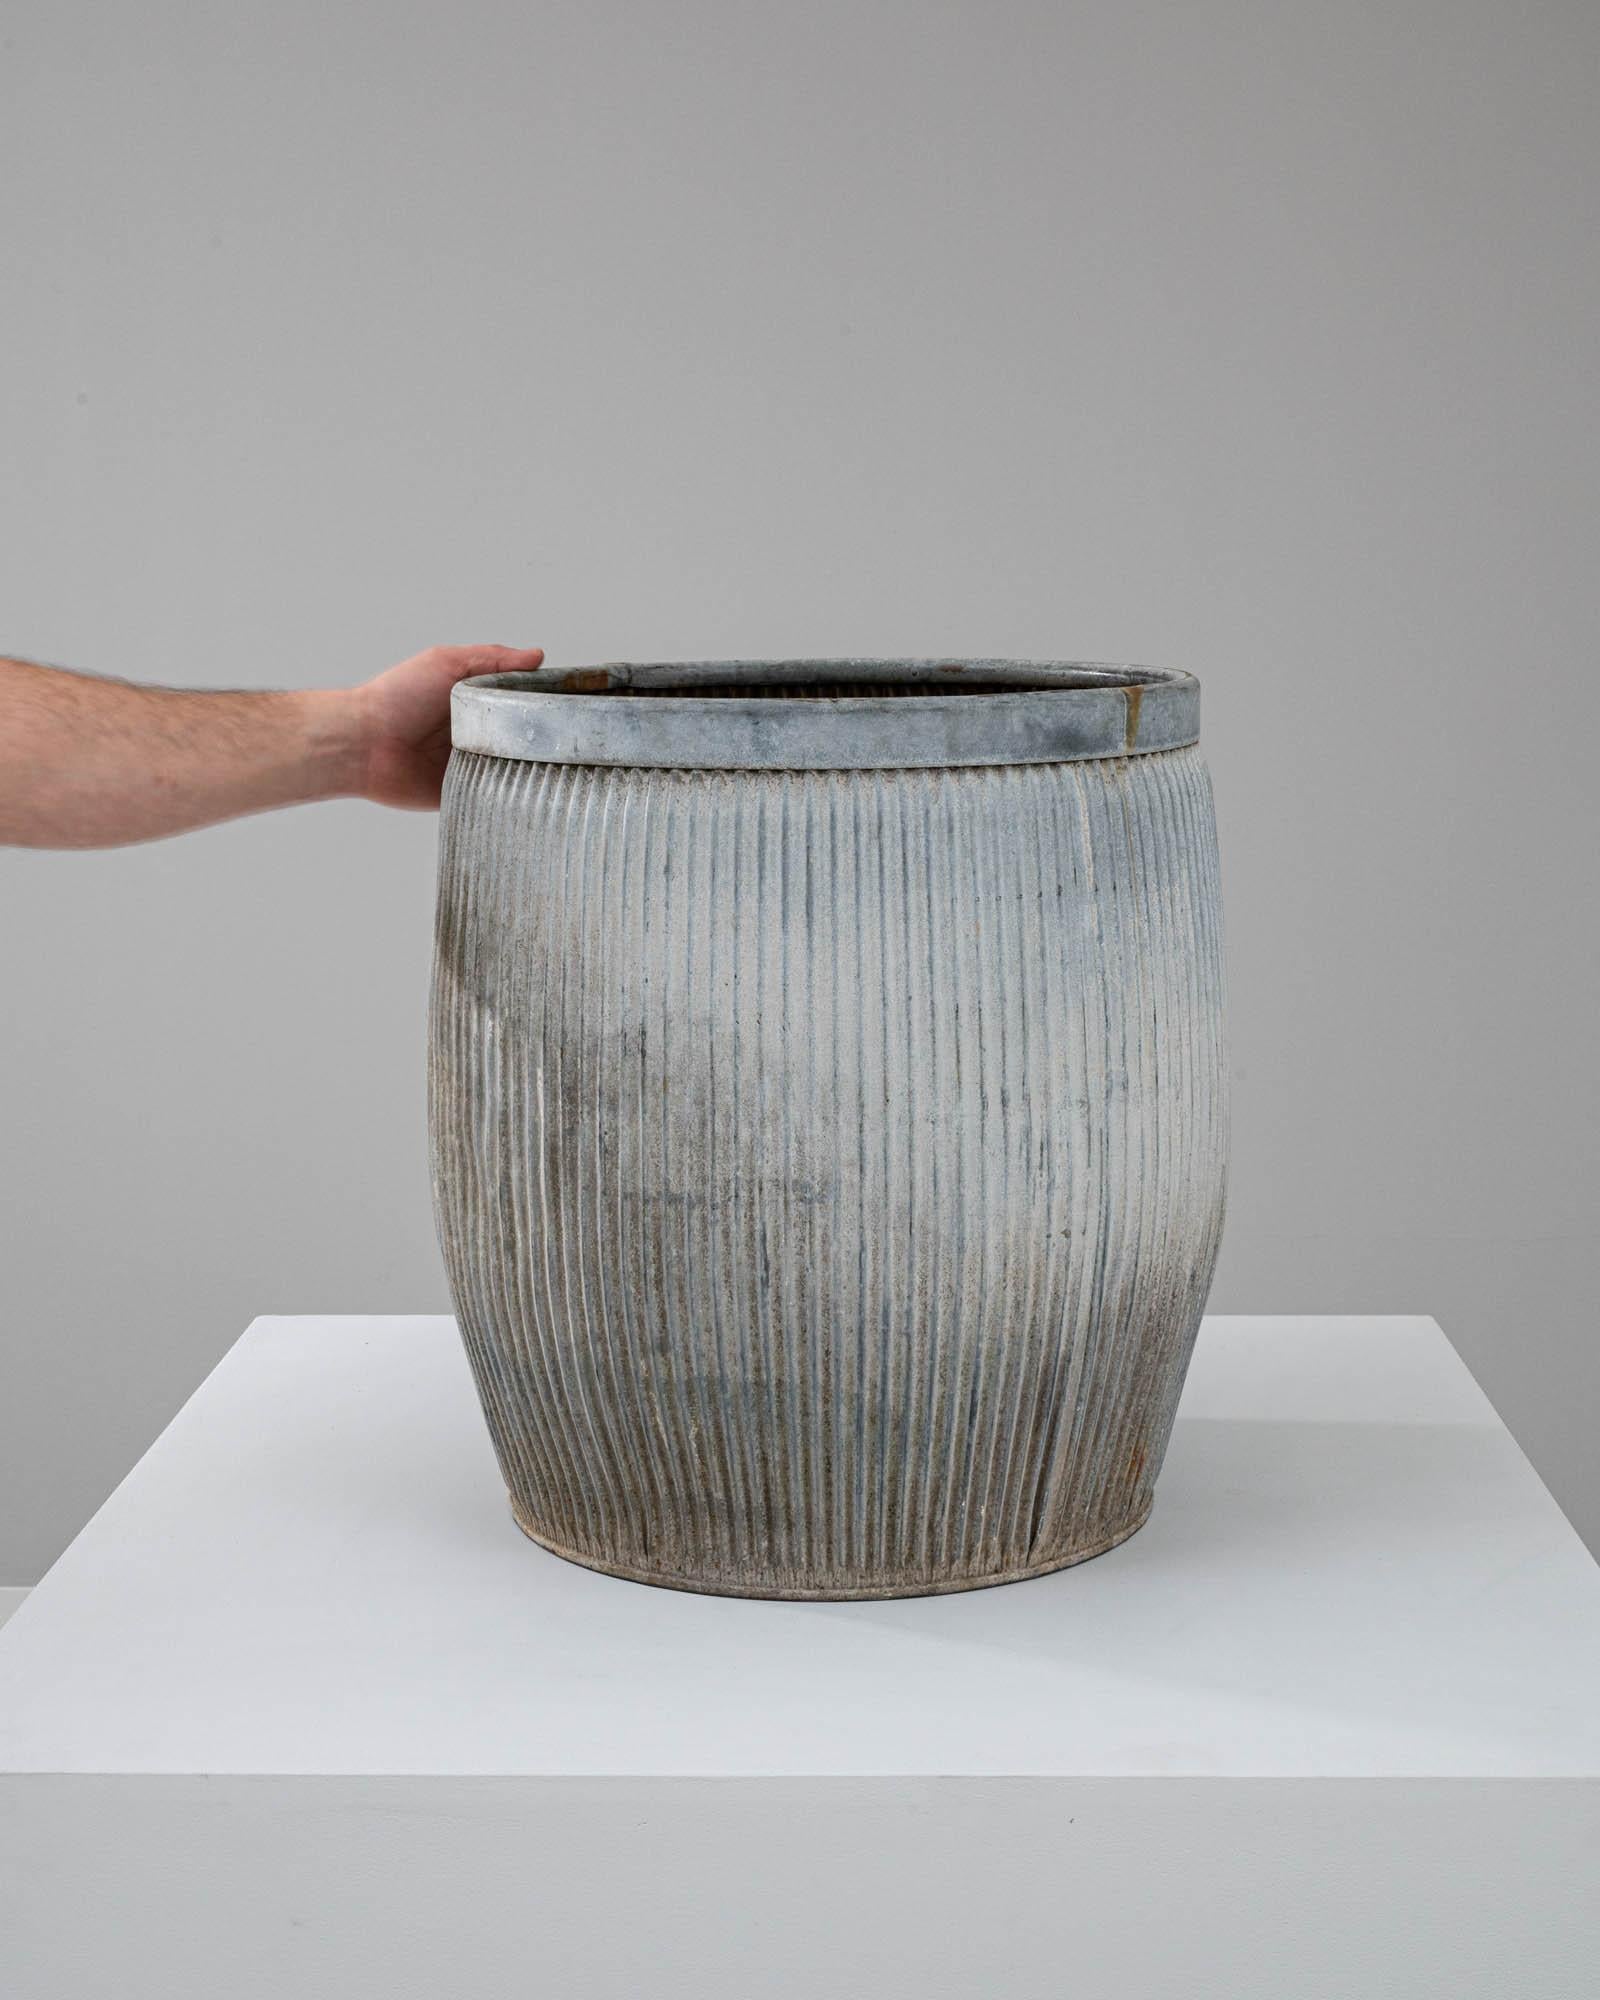 This 20th-century British zinc planter is a striking addition to any space that values a blend of industrial charm and pastoral beauty. Its cylindrical shape is accentuated by vertical ridges that add texture and visual interest, while the zinc